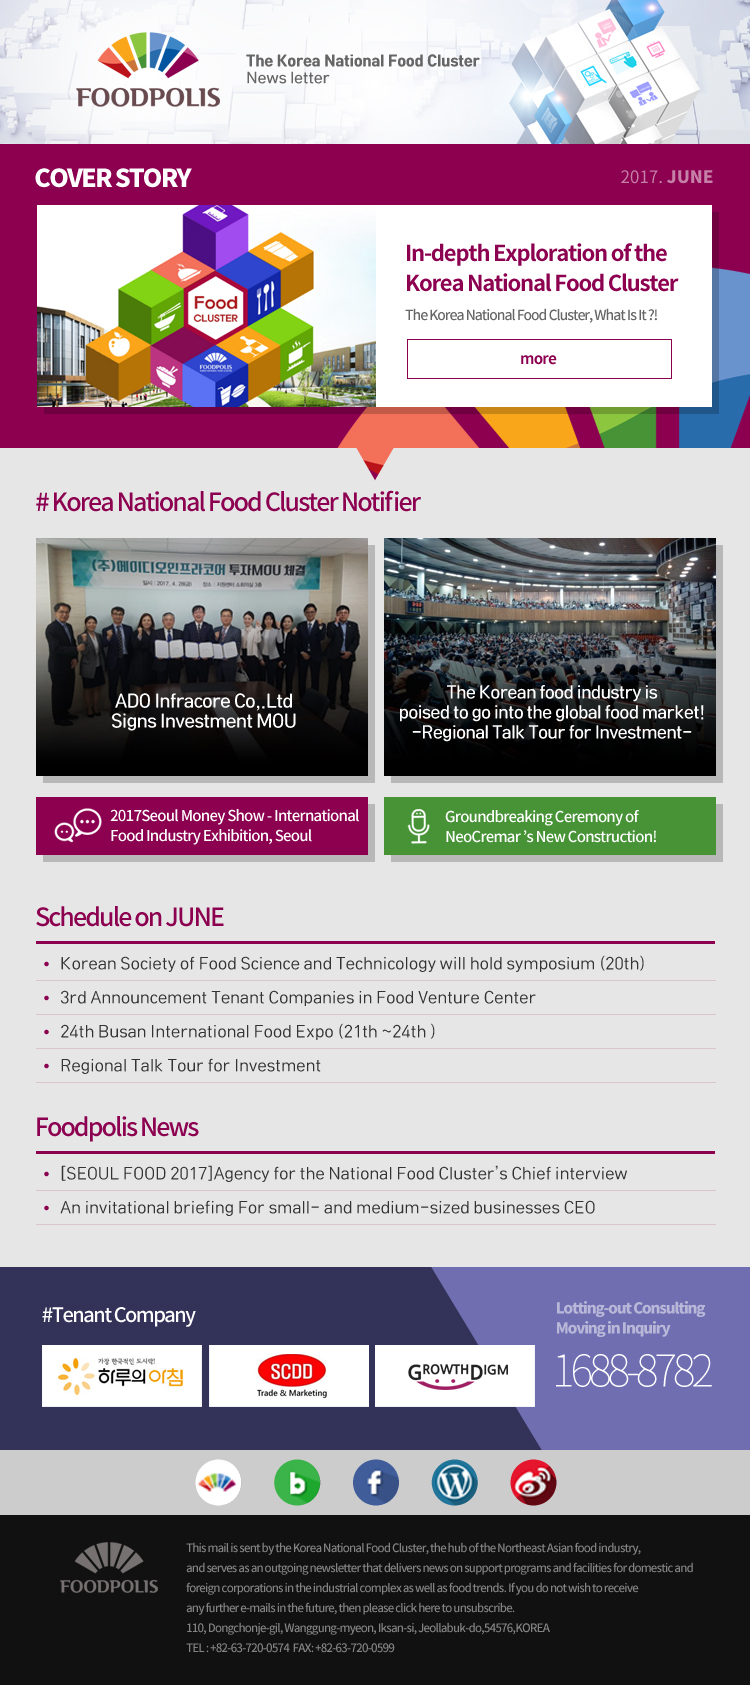 2017 June News Letter from the Korea National Food Cluster